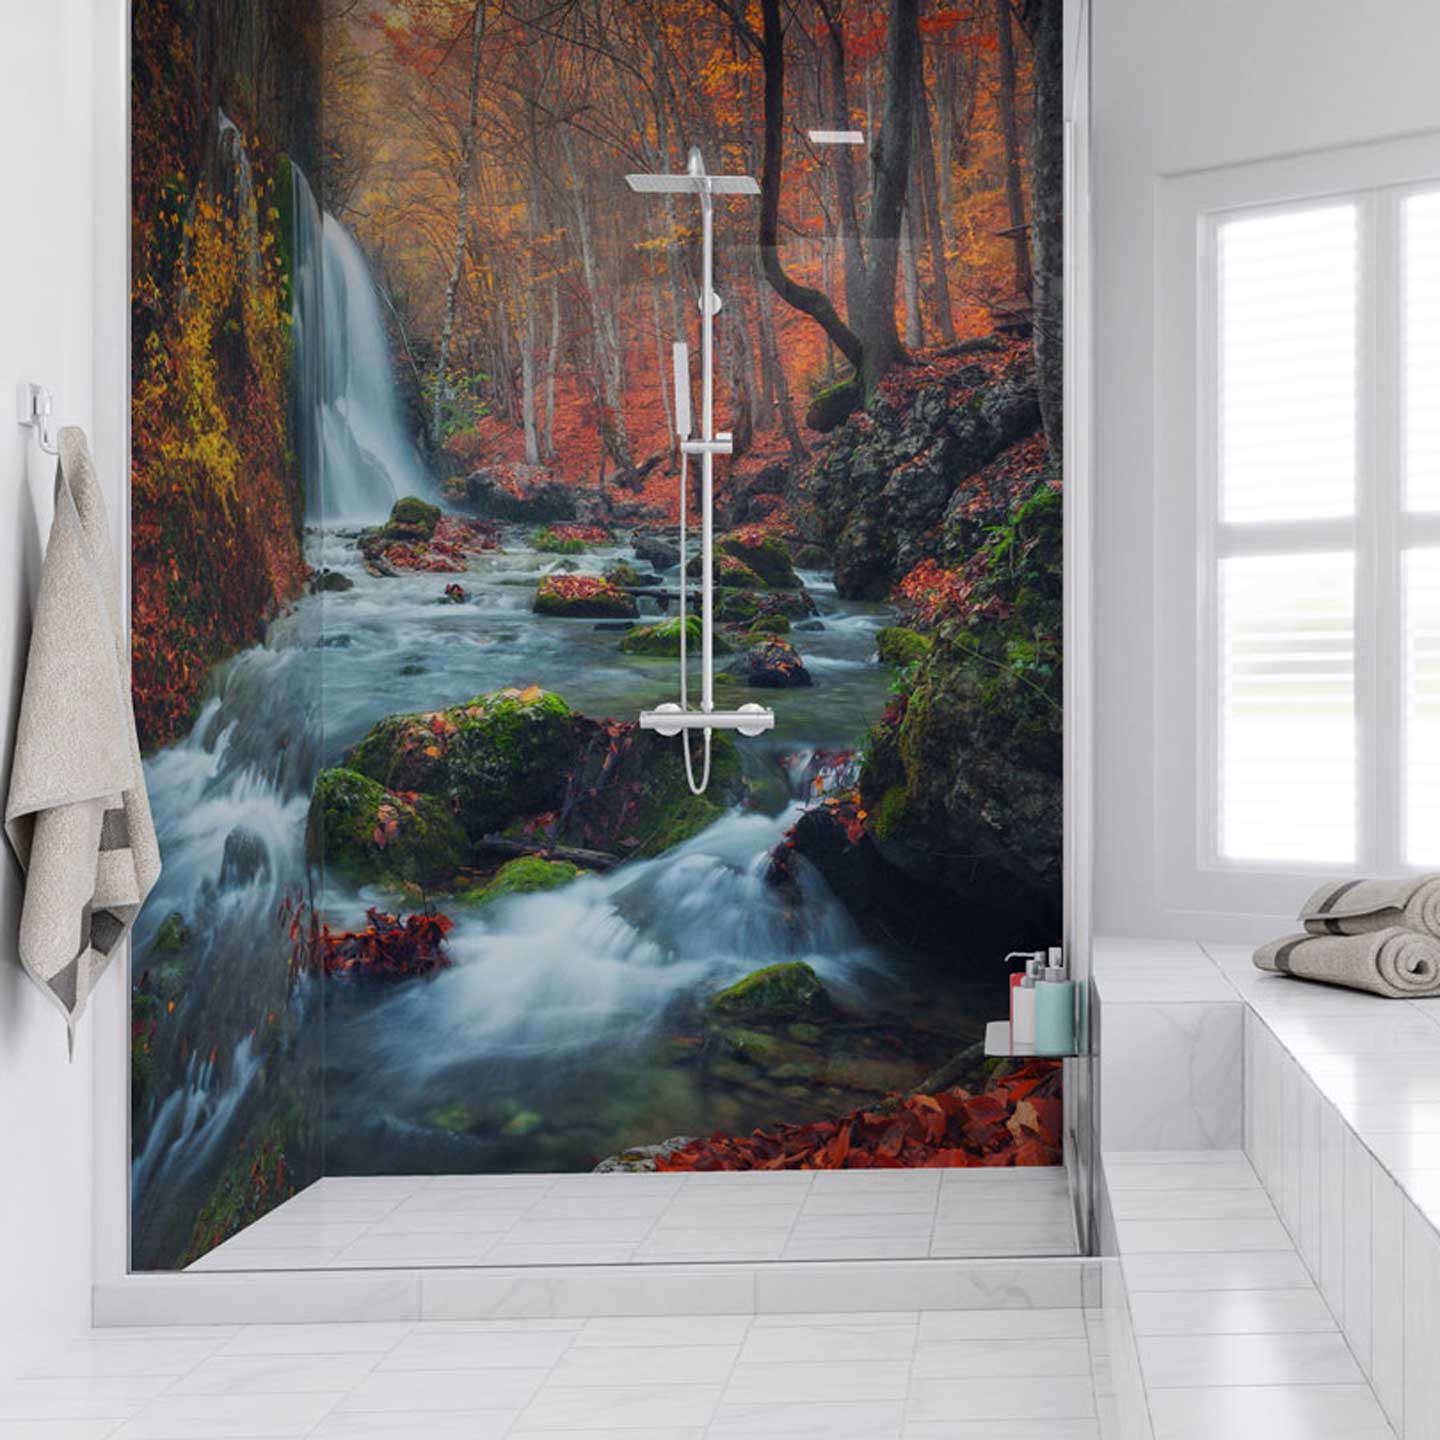 Bathroom Shower Splashbacks Glass Look Printed Waterfall In Forest Cropped Wr 